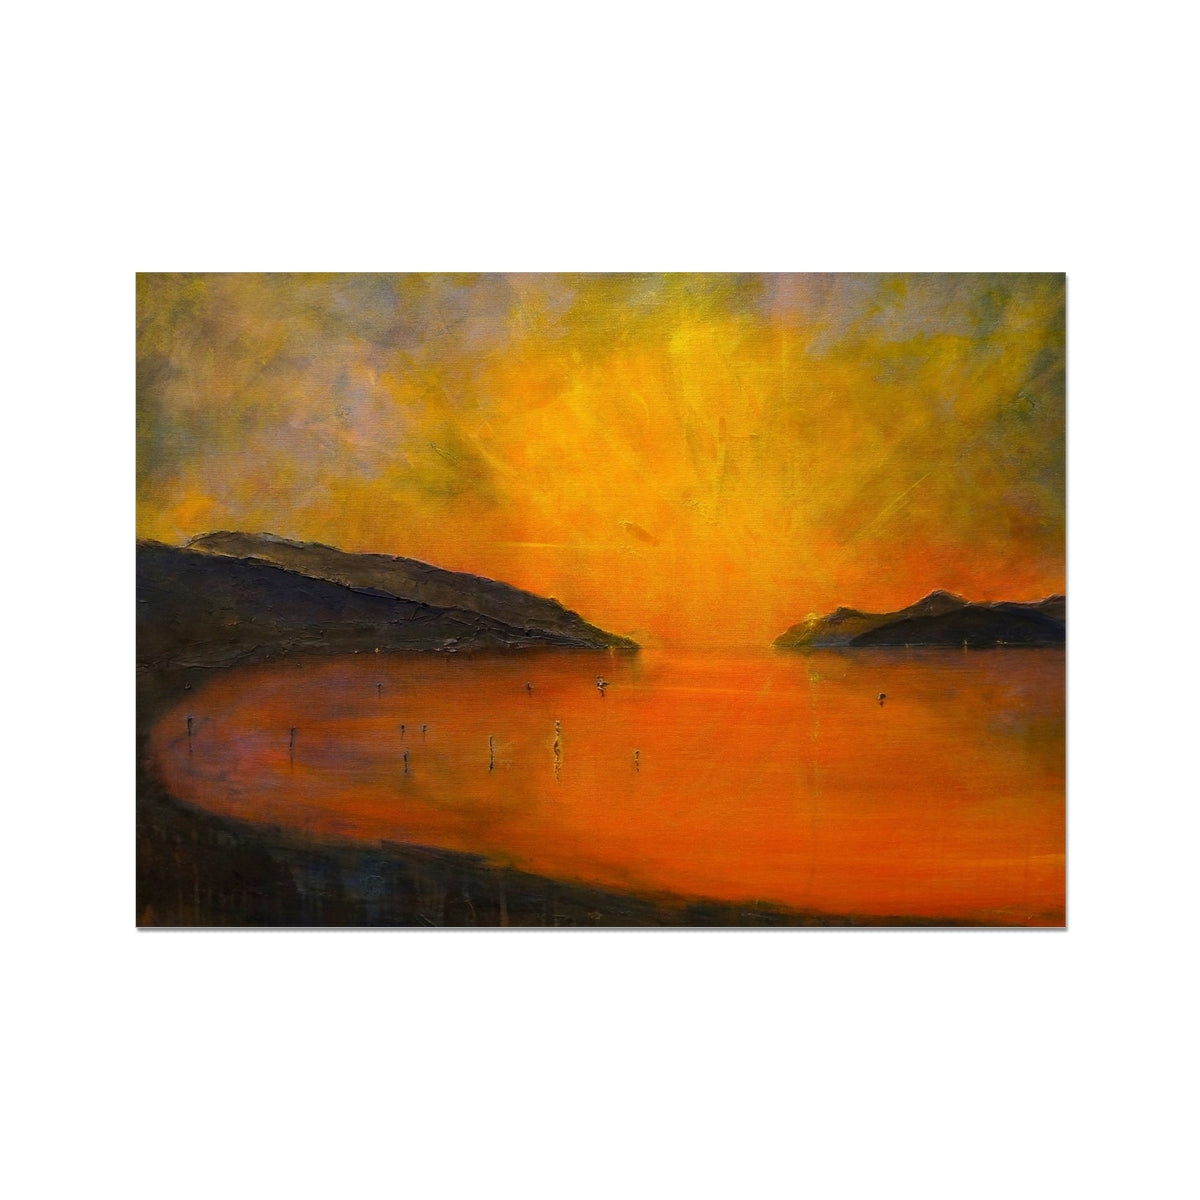 Loch Ness Sunset Painting | Fine Art Prints From Scotland-Fine art-Scottish Lochs & Mountains Art Gallery-A2 Landscape-Paintings, Prints, Homeware, Art Gifts From Scotland By Scottish Artist Kevin Hunter